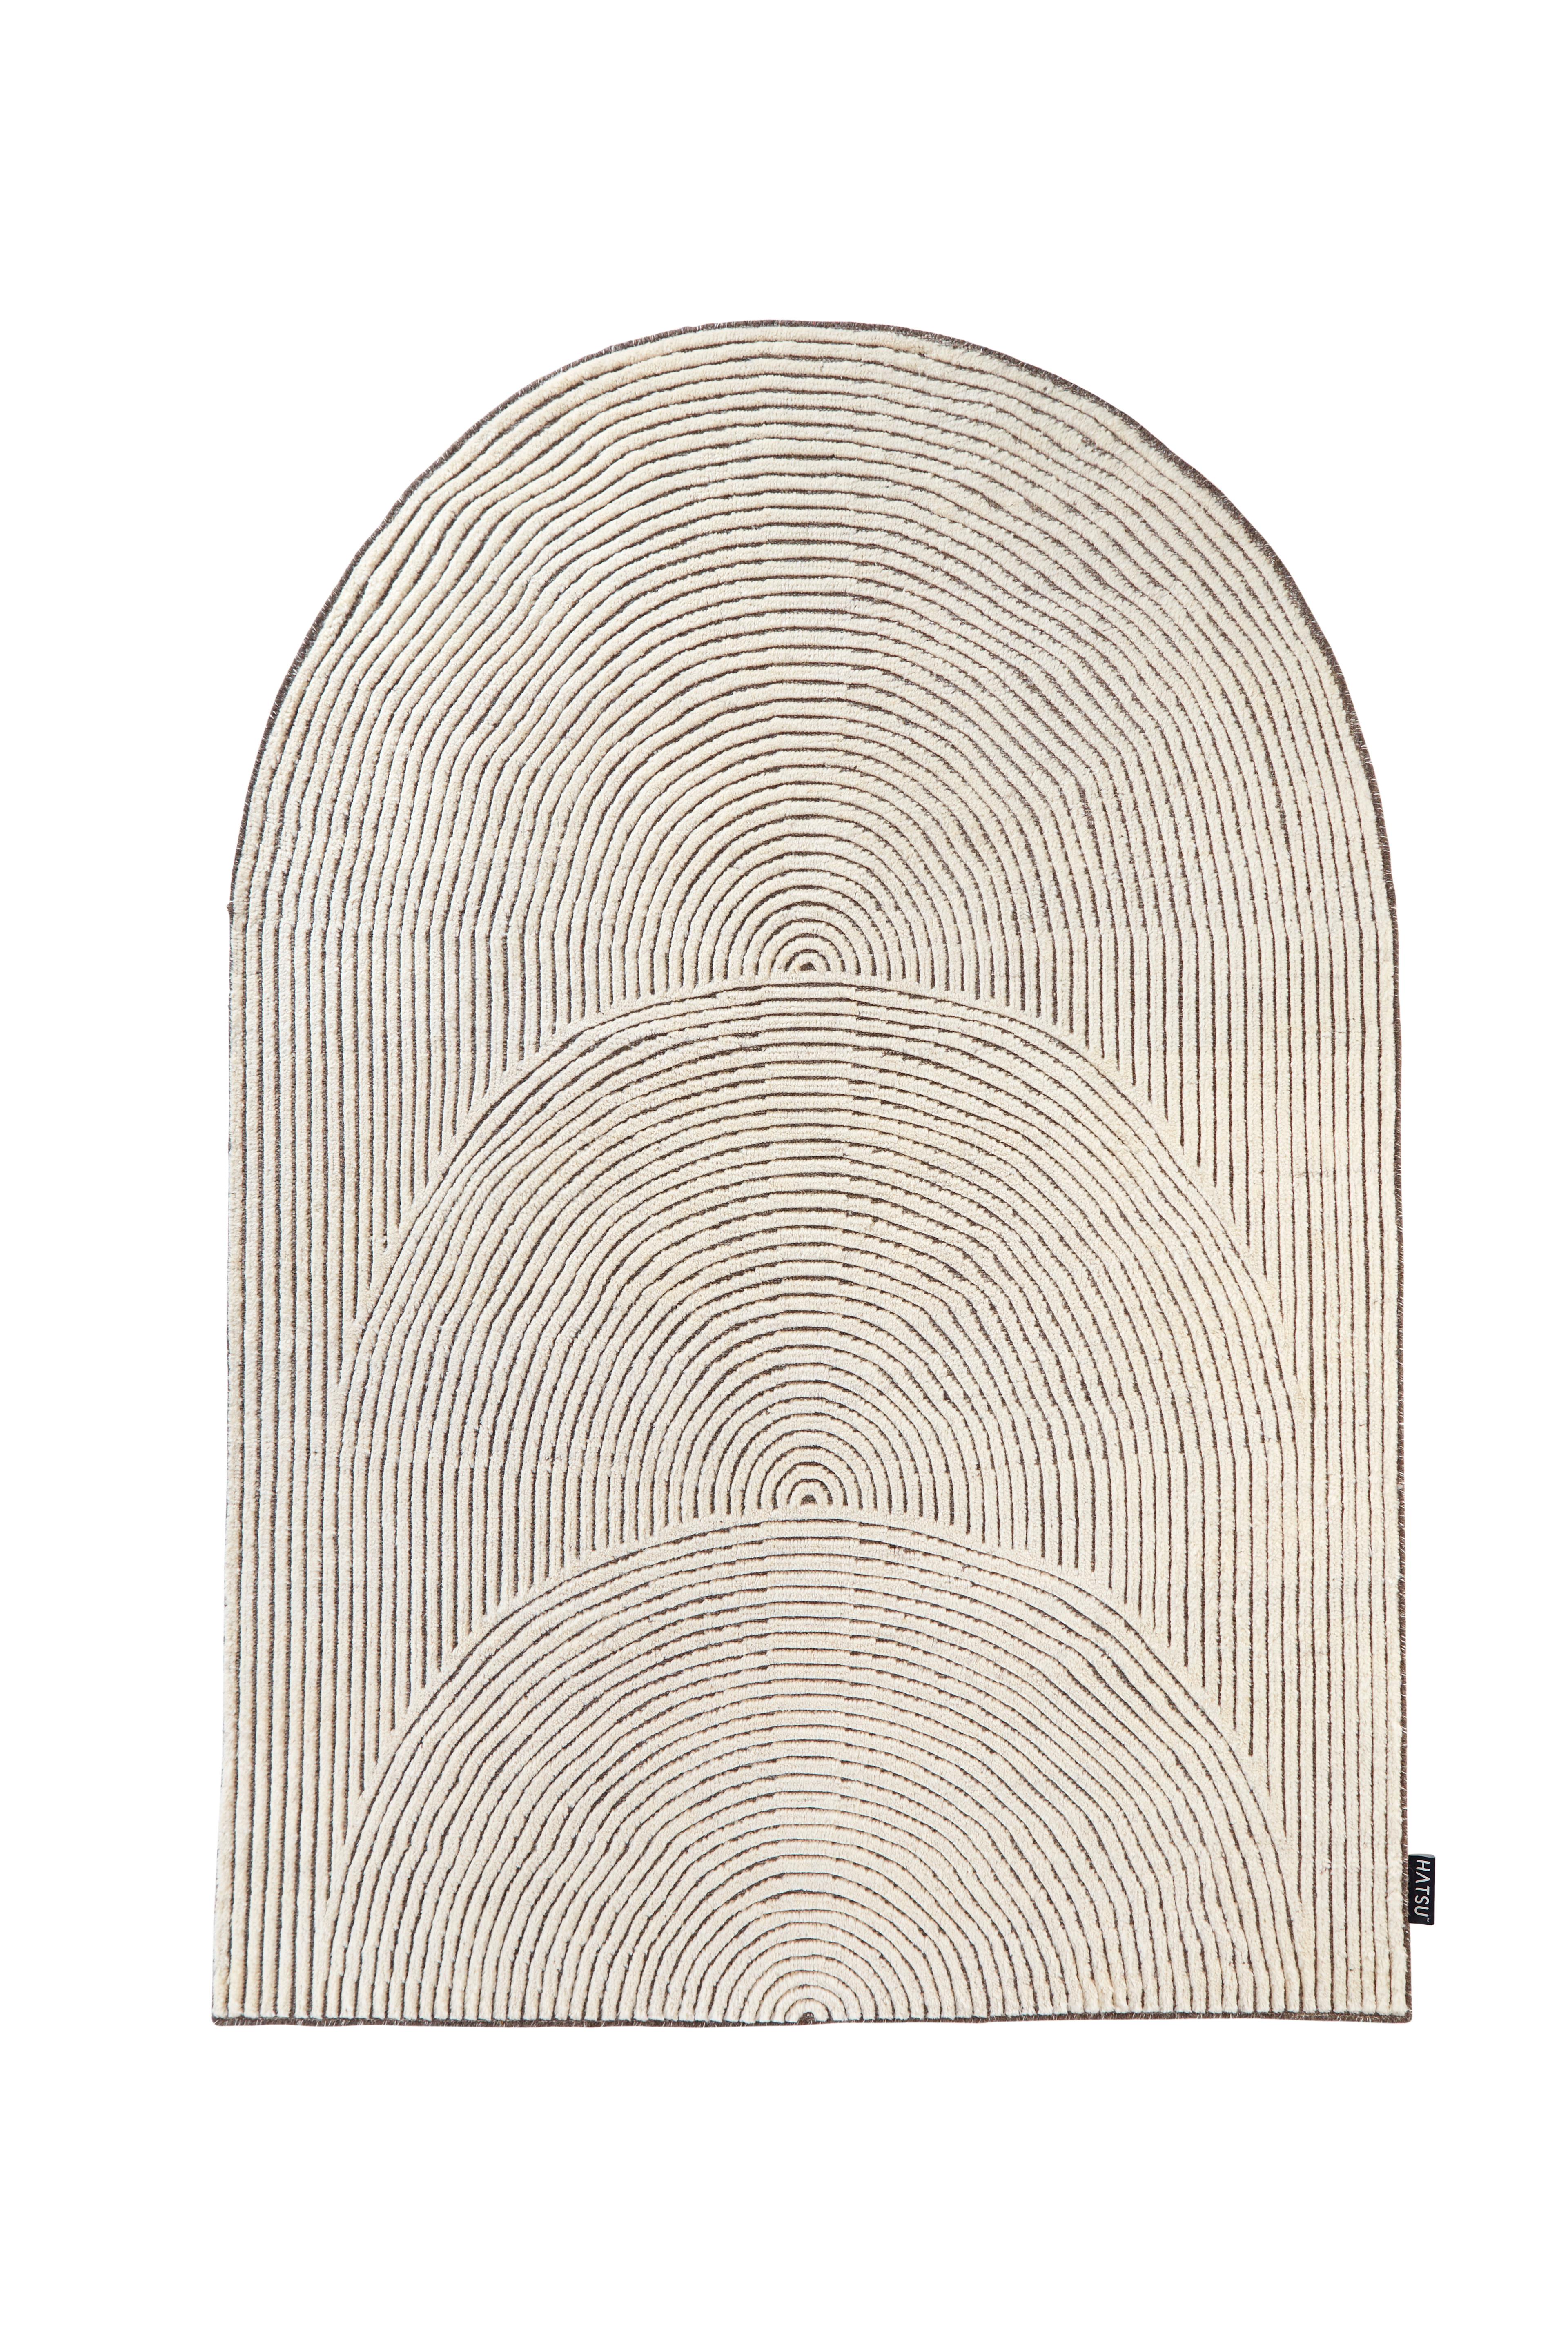 Hand knotted semicircle rug by Hatsu
Dimensions: D 222 x W 152 cm 
Materials: Wool

Hatsu is a design studio based in Mumbai that creates modern lighting that are unique and immediately recognisable. We started with an idea to make good design